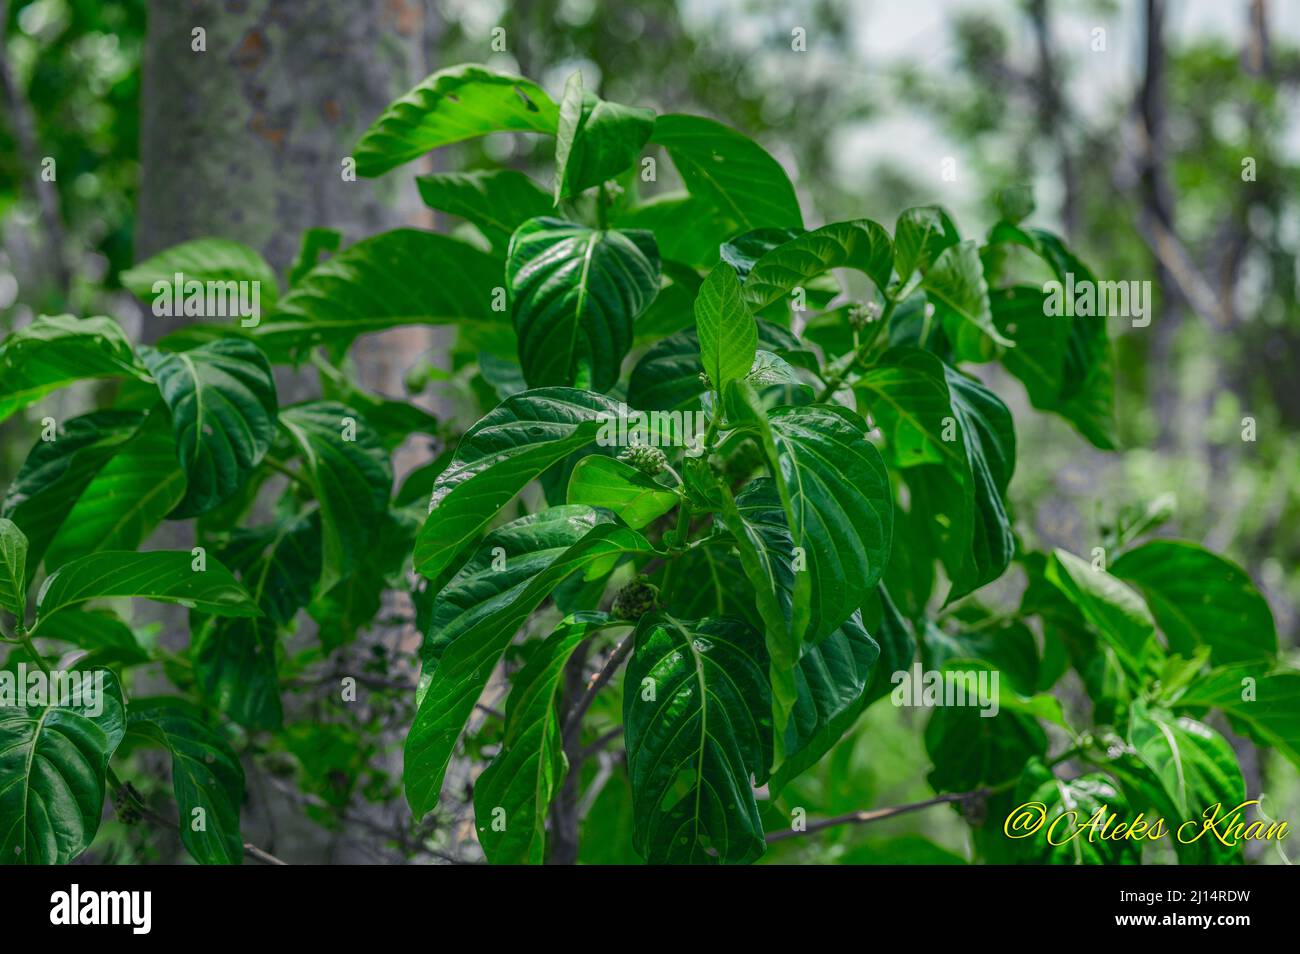 The photo shows a noni fruit hanging from a tree. The morinda tree is exotic and native to the tropics. Photo quality HD. Glossy dark green leaves and Stock Photo